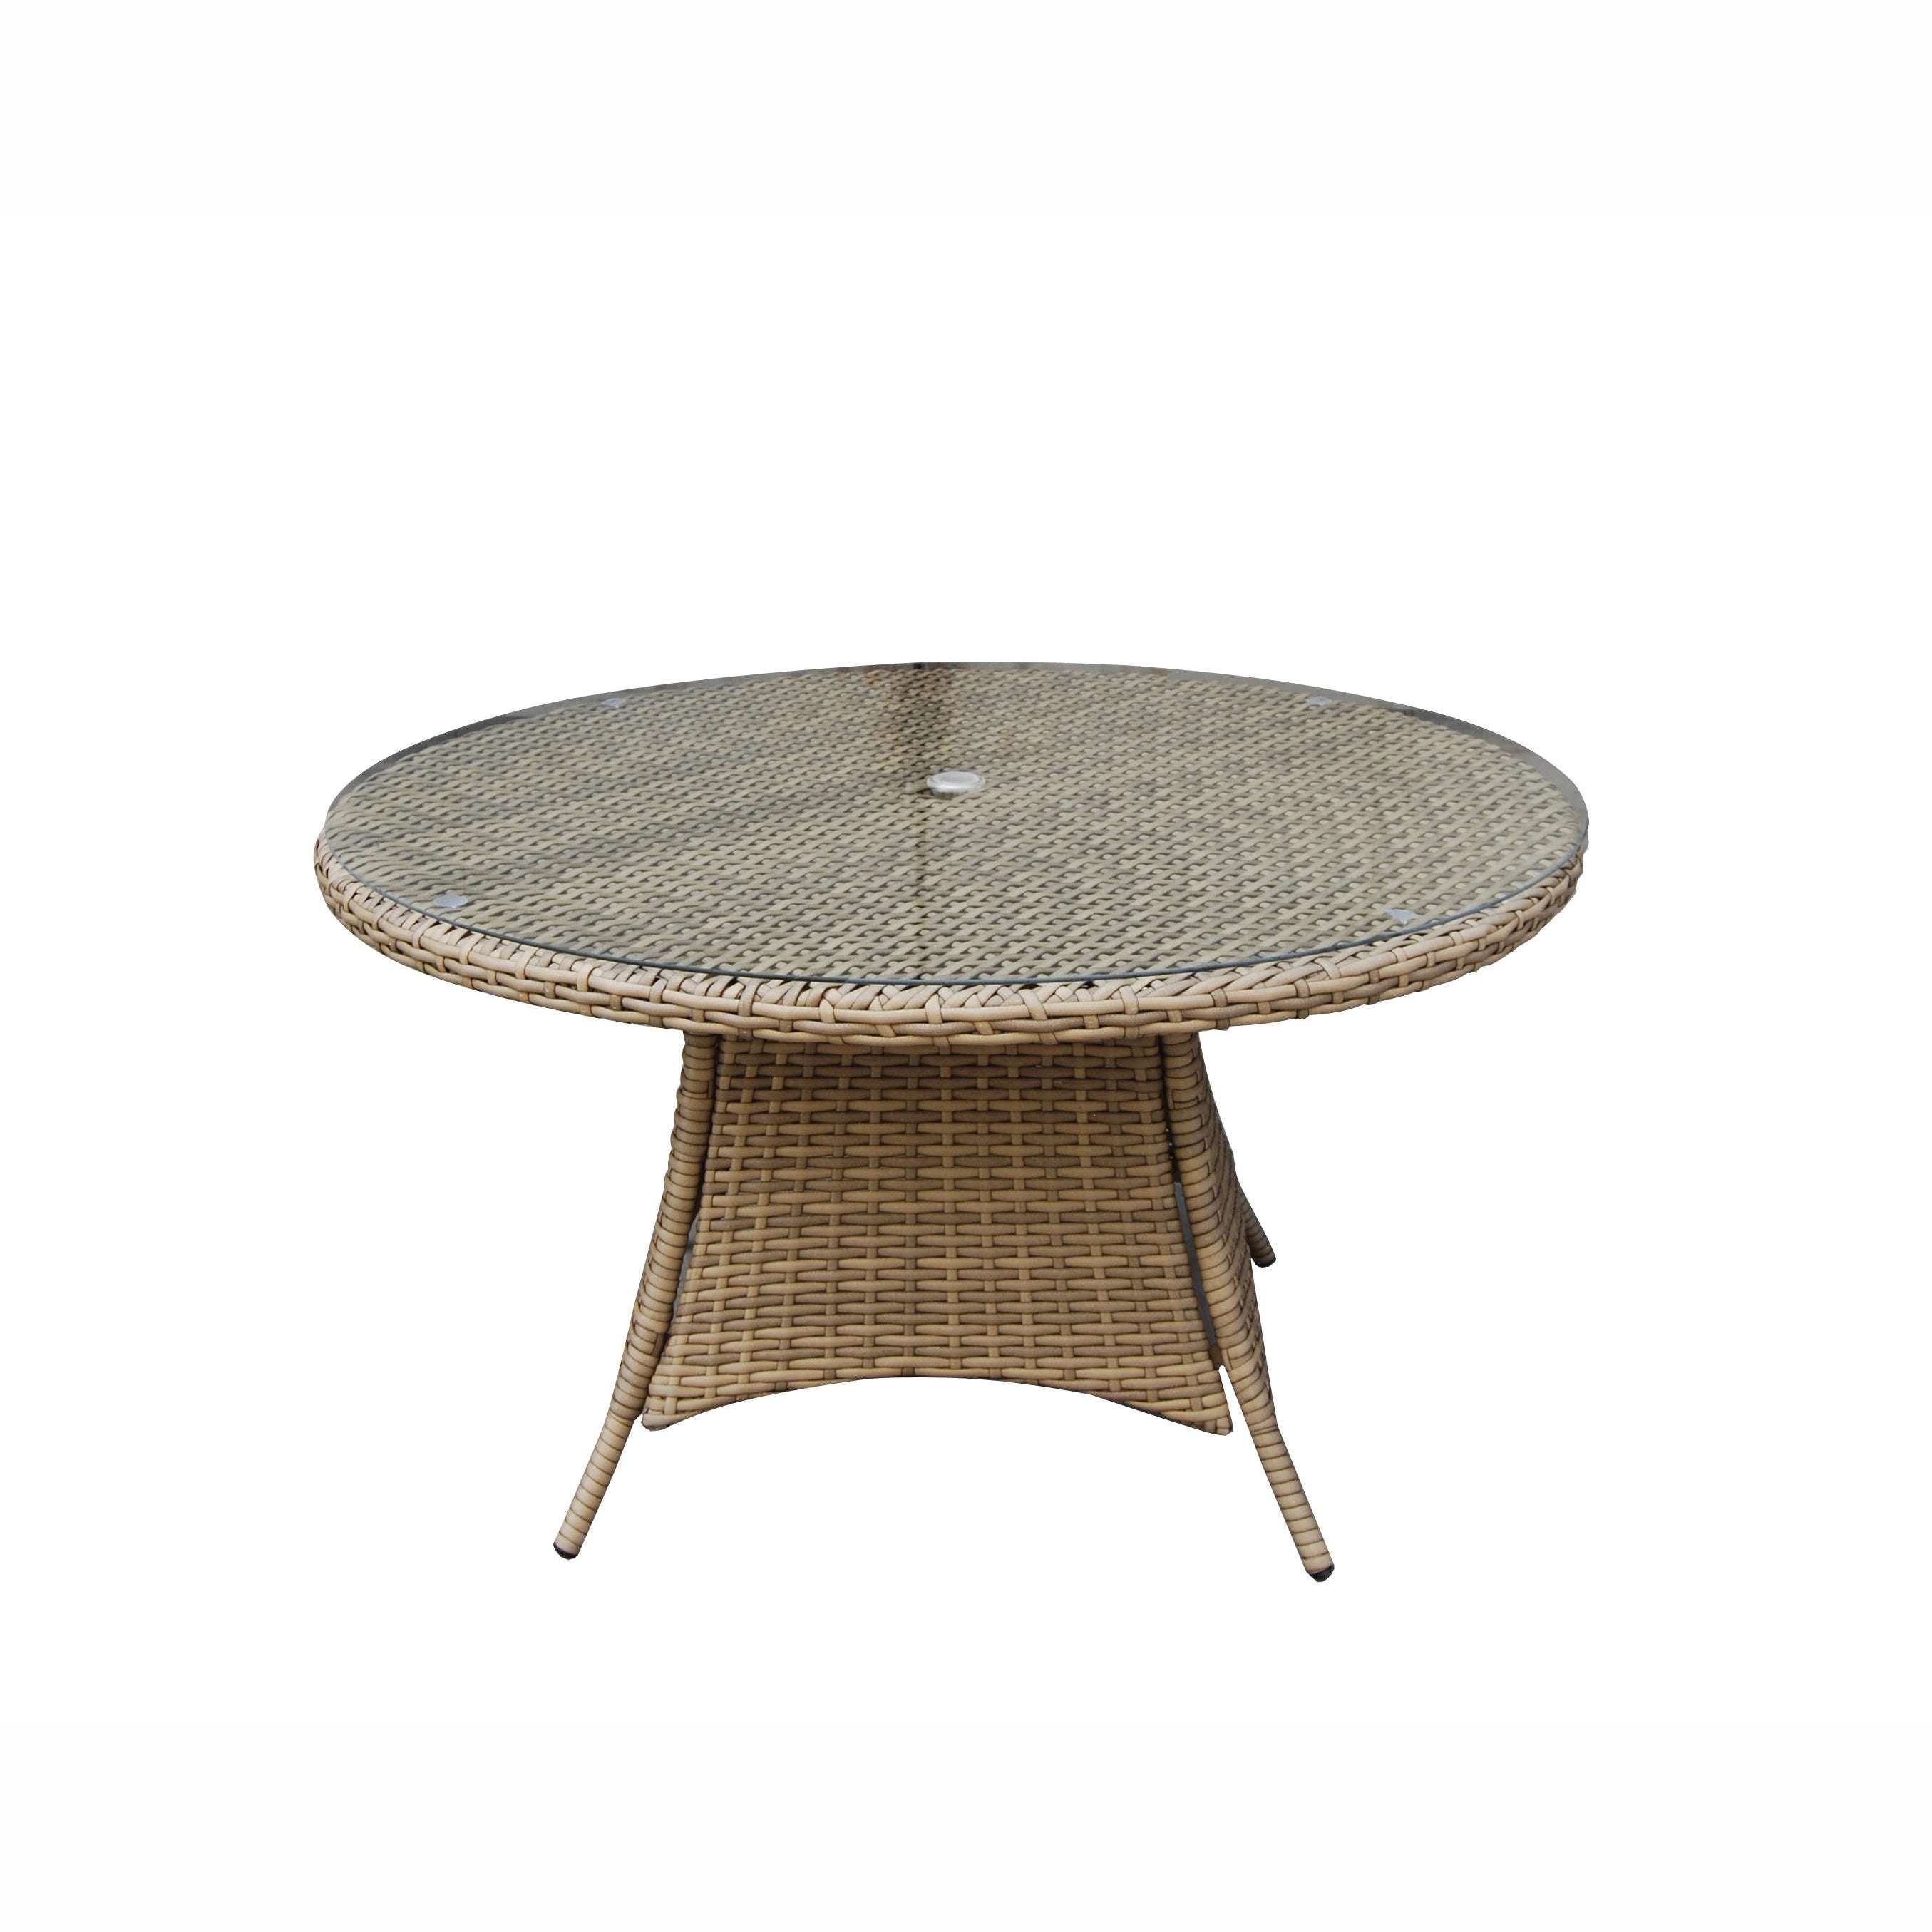 Exceptional Garden:Signature Weave Darcey 4-Seater Dining Set with Round Table and High Back Chairs